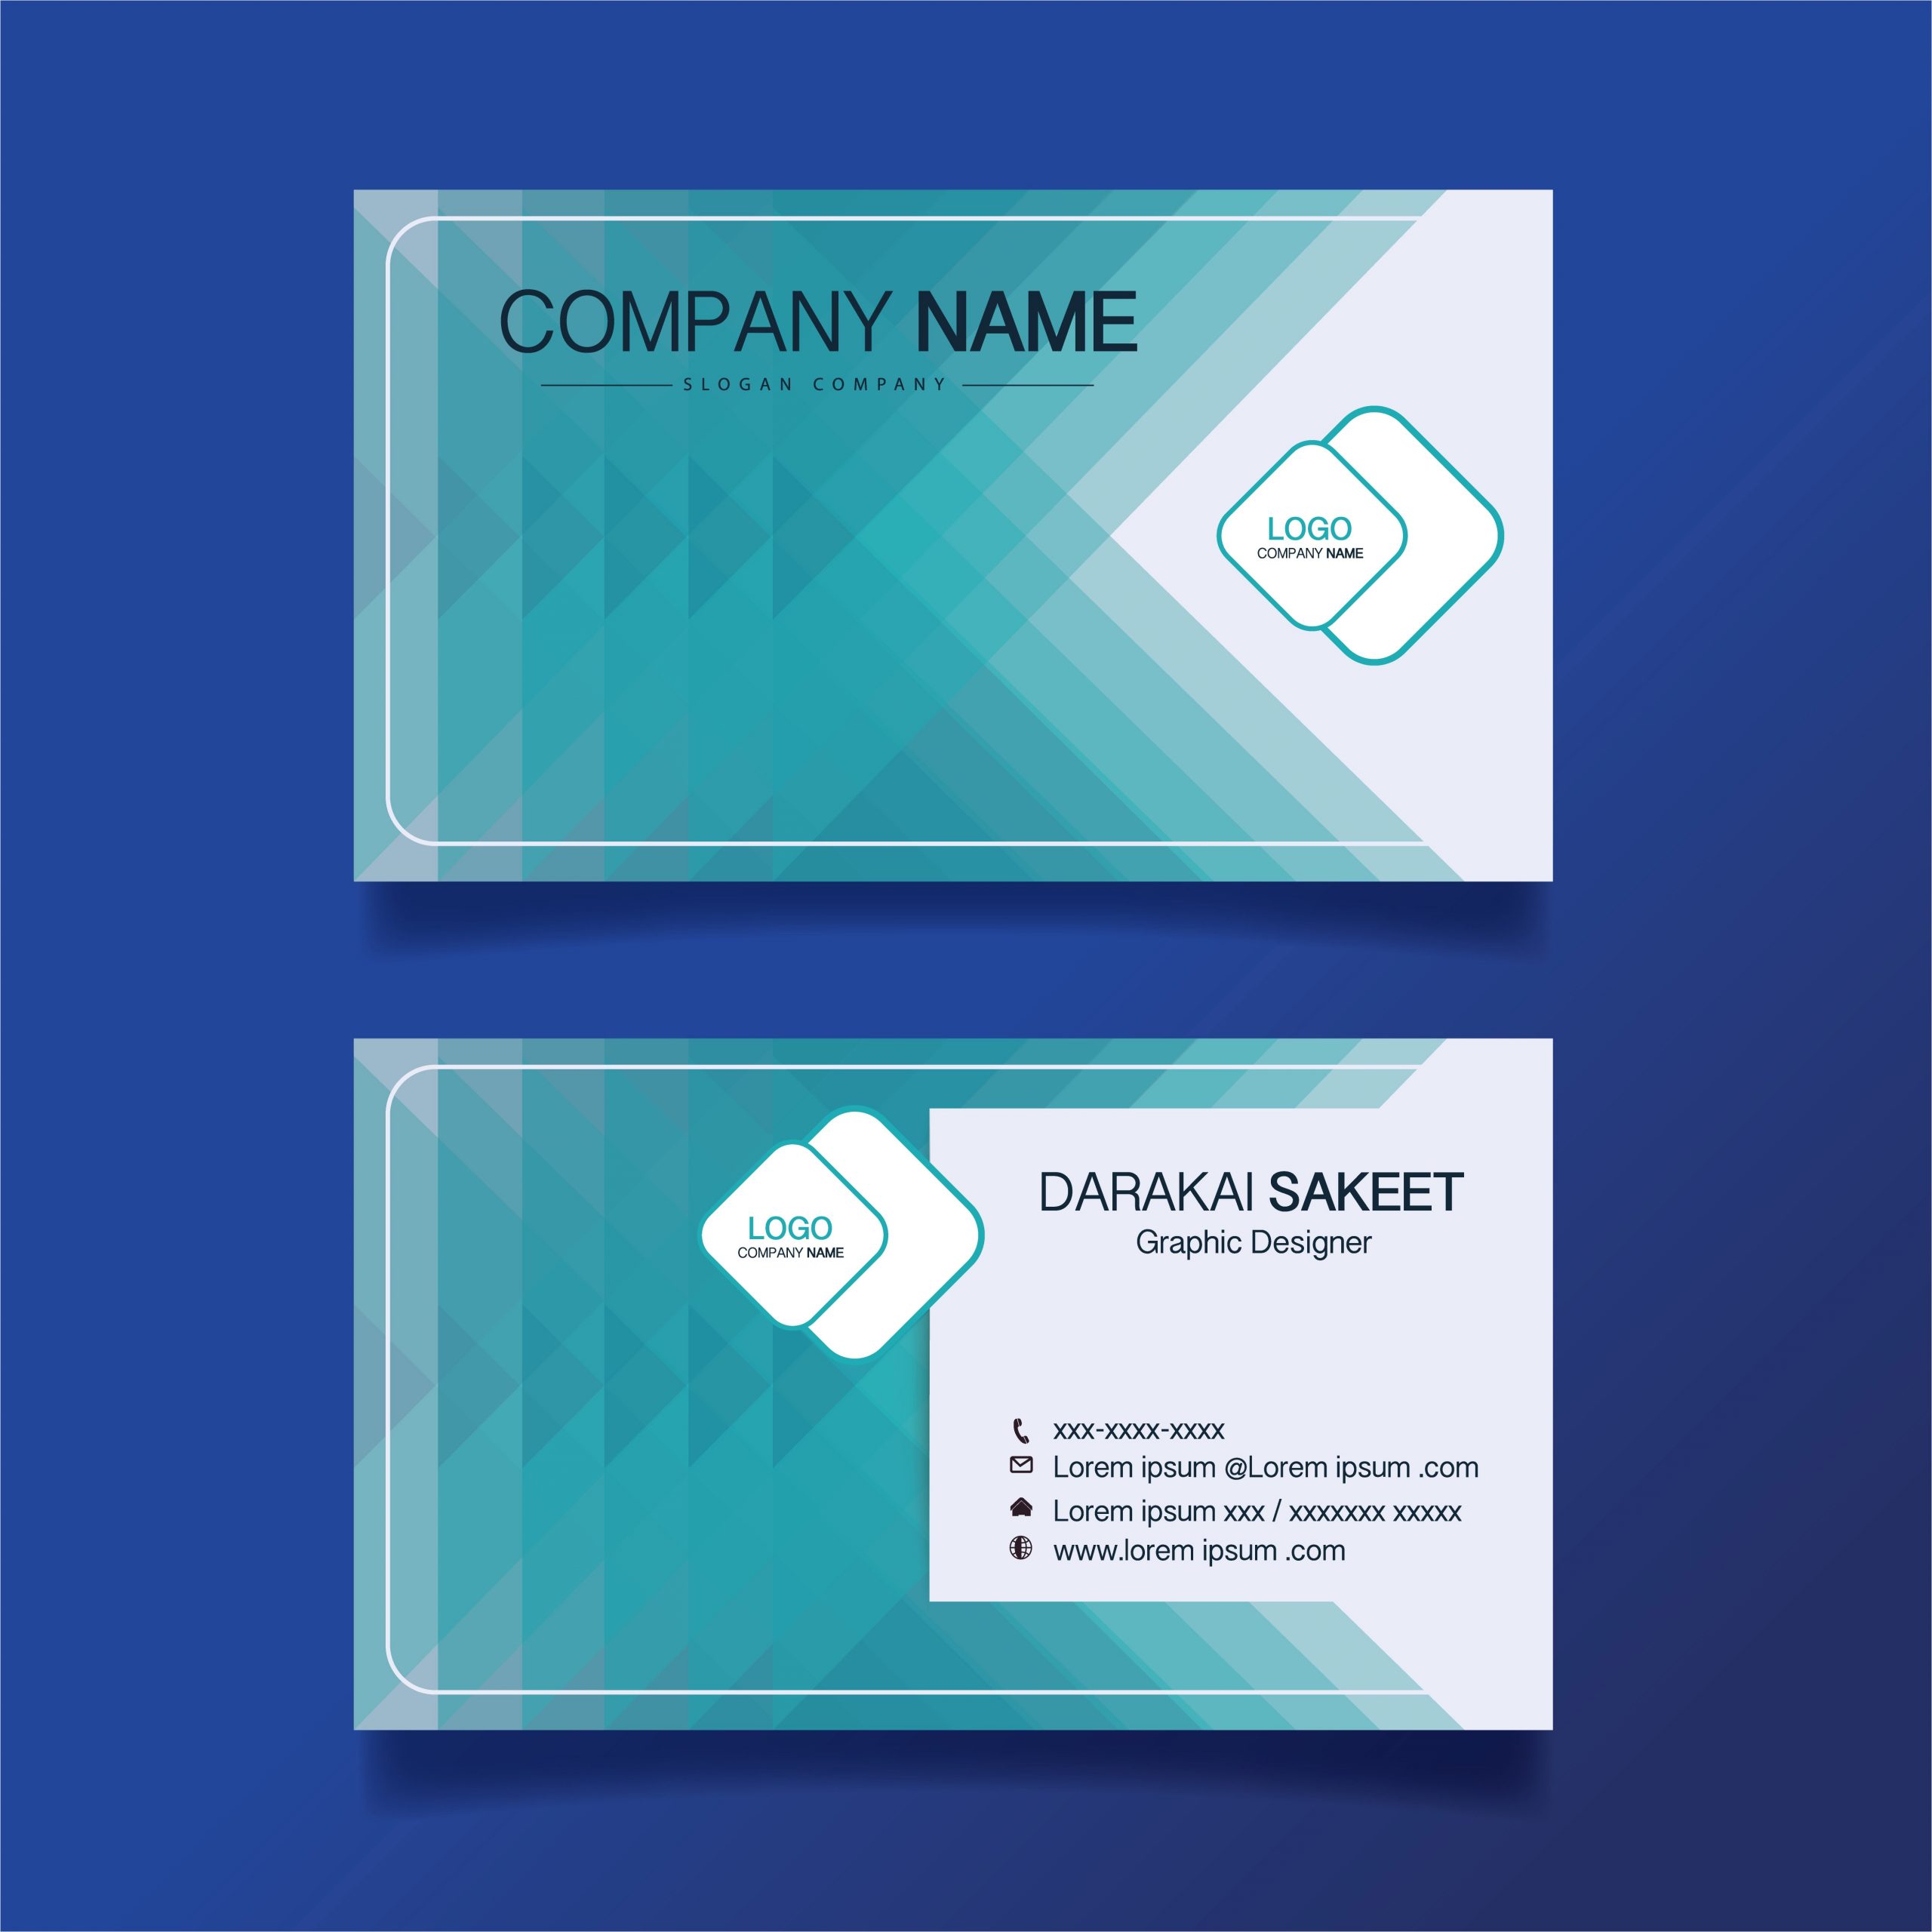 name card modern simple business card template vector illustration